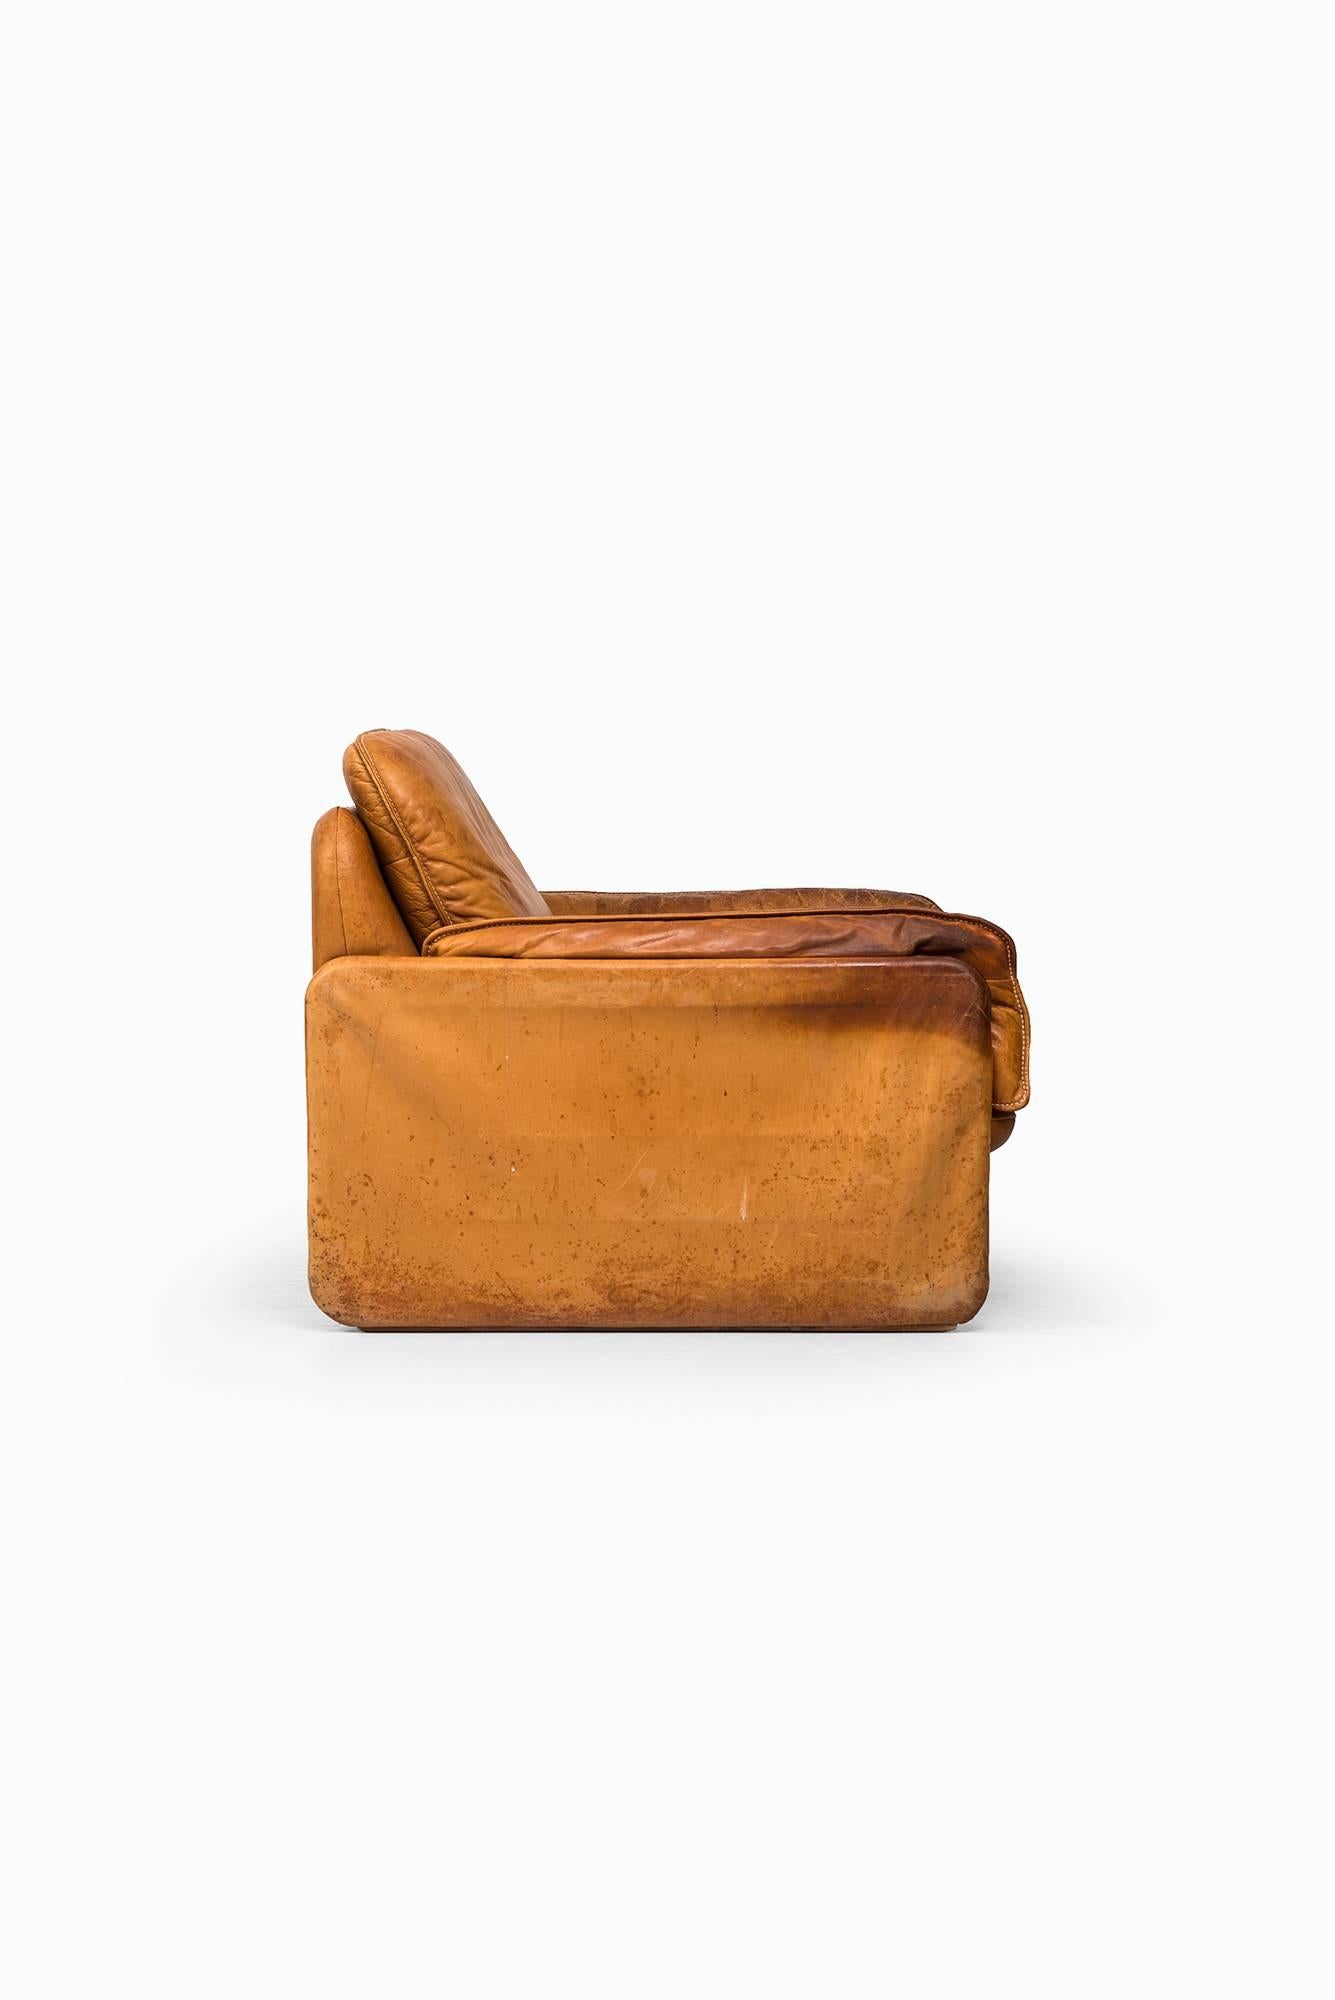 Mid-20th Century Easy Chairs in Cognac Brown Leather by De Sede in Switzerland